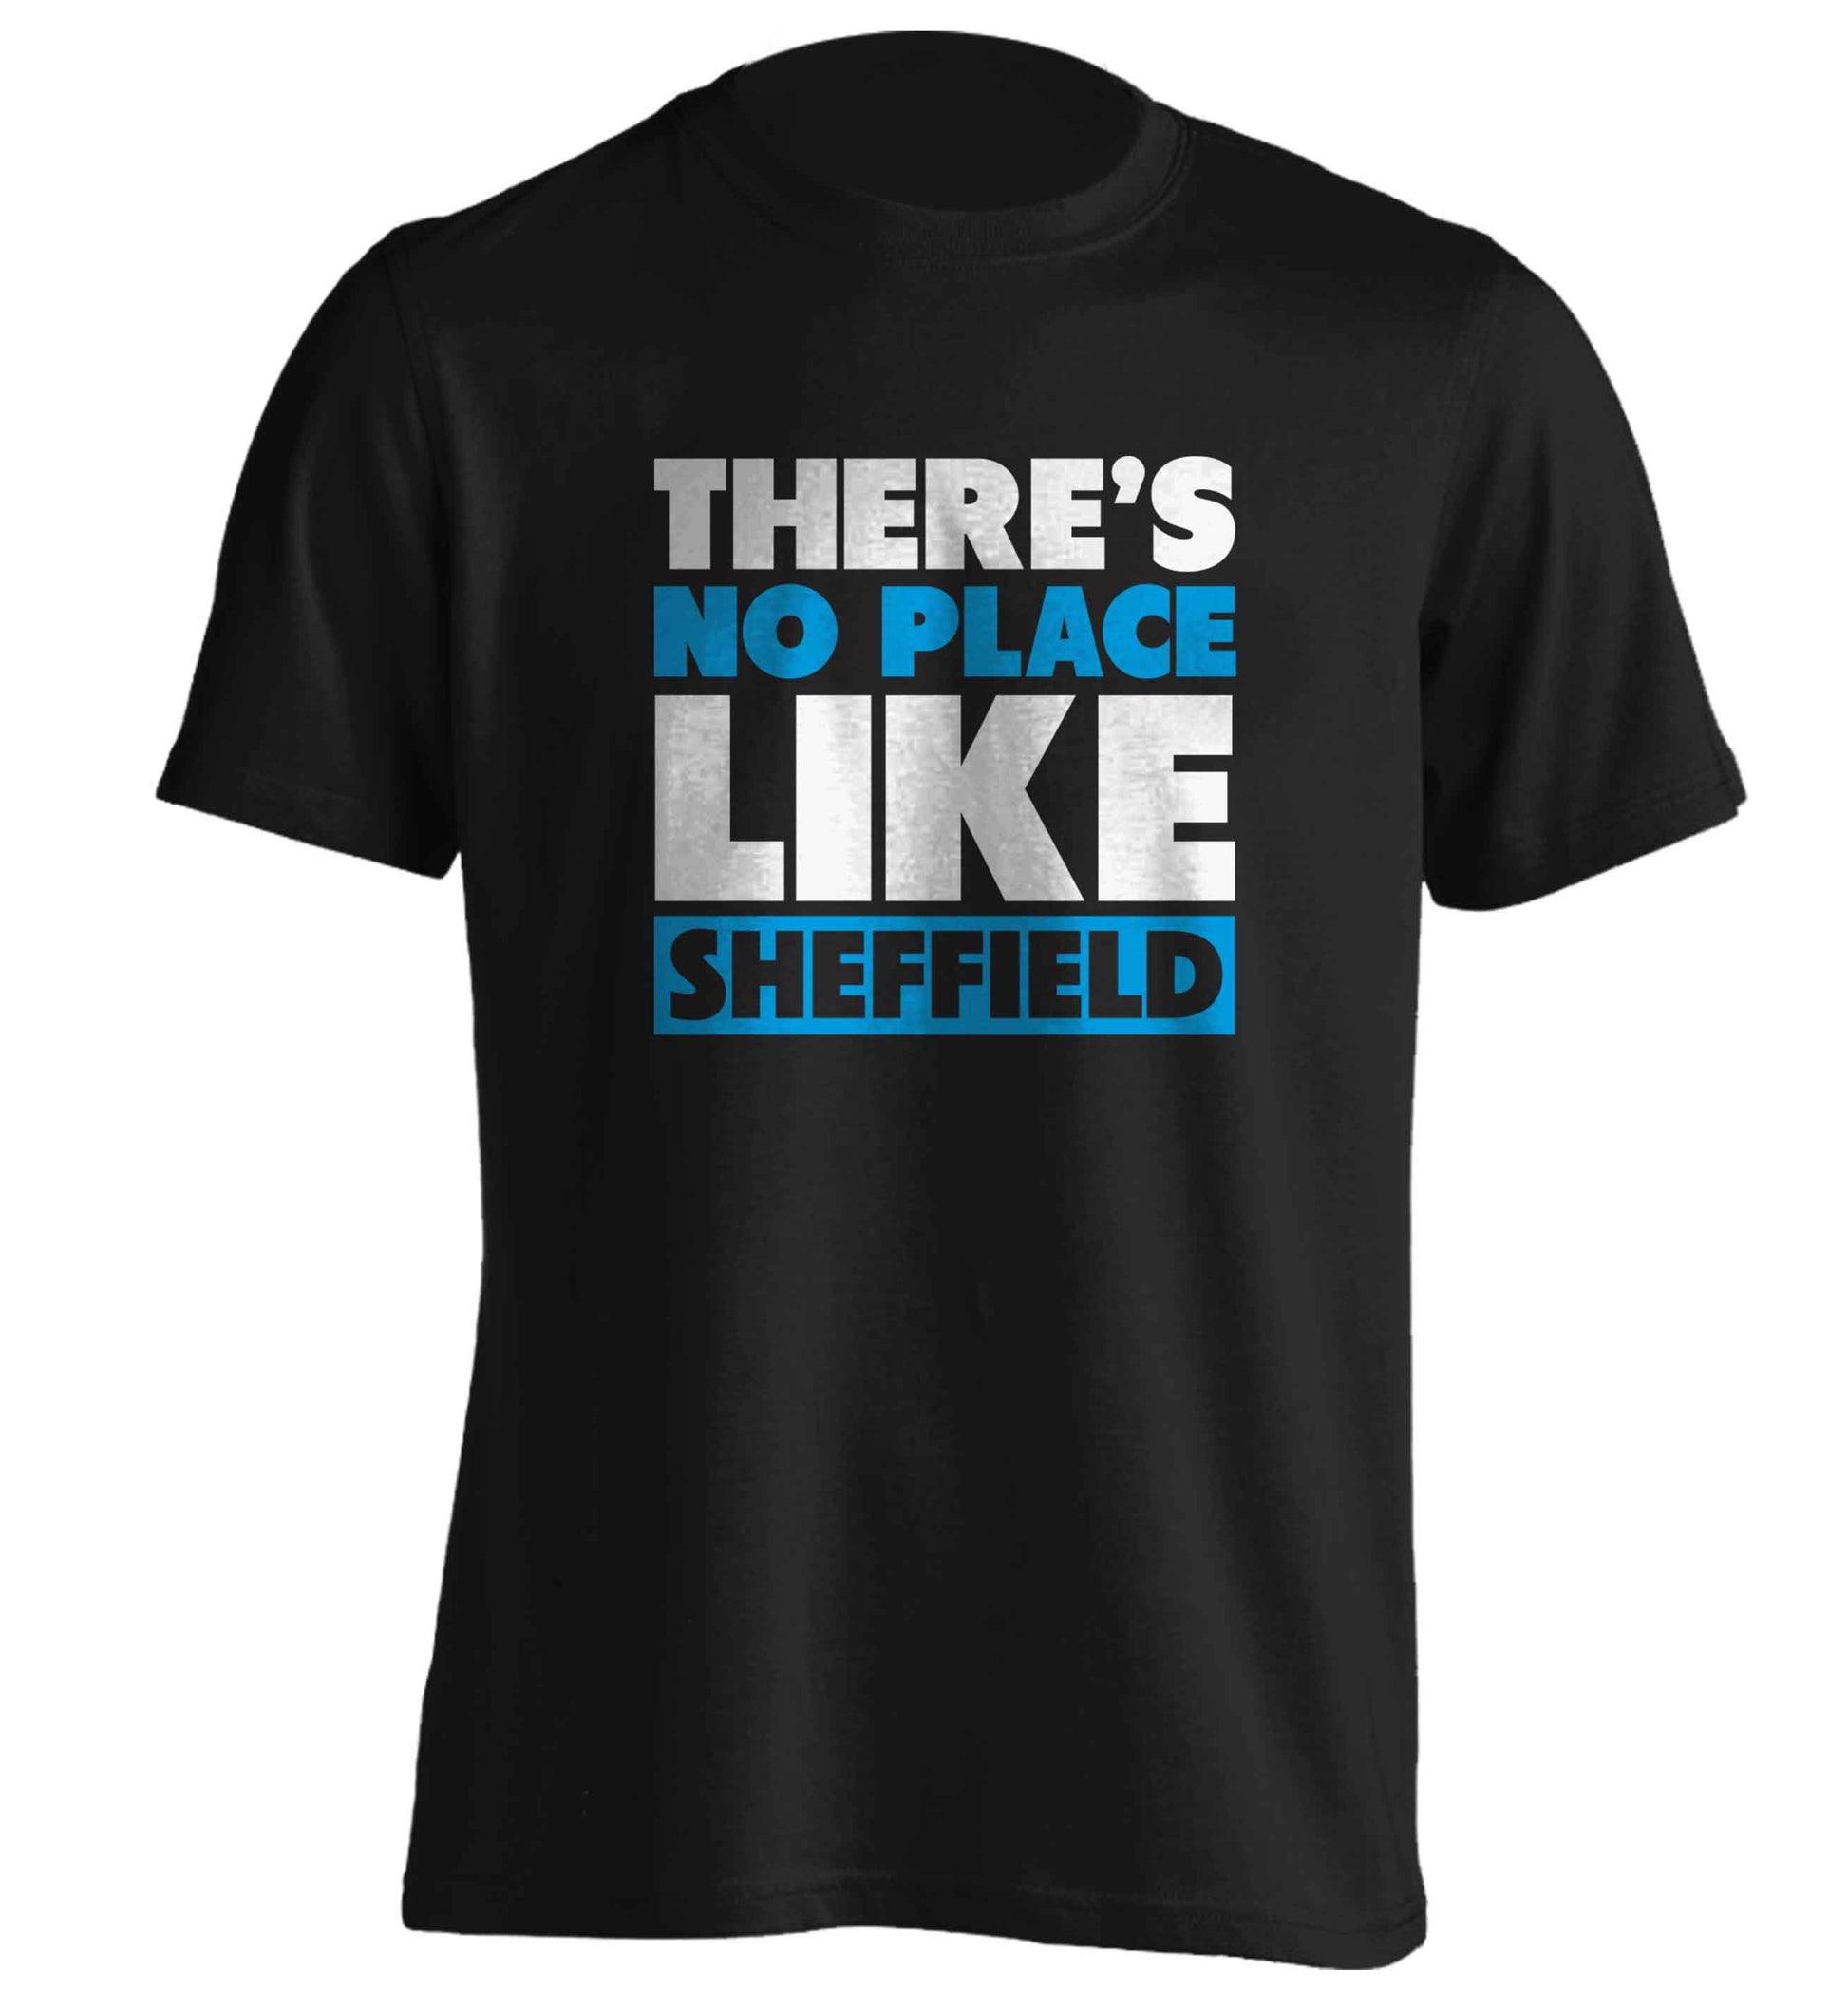 There's no place like Sheffield adults unisex black Tshirt 2XL